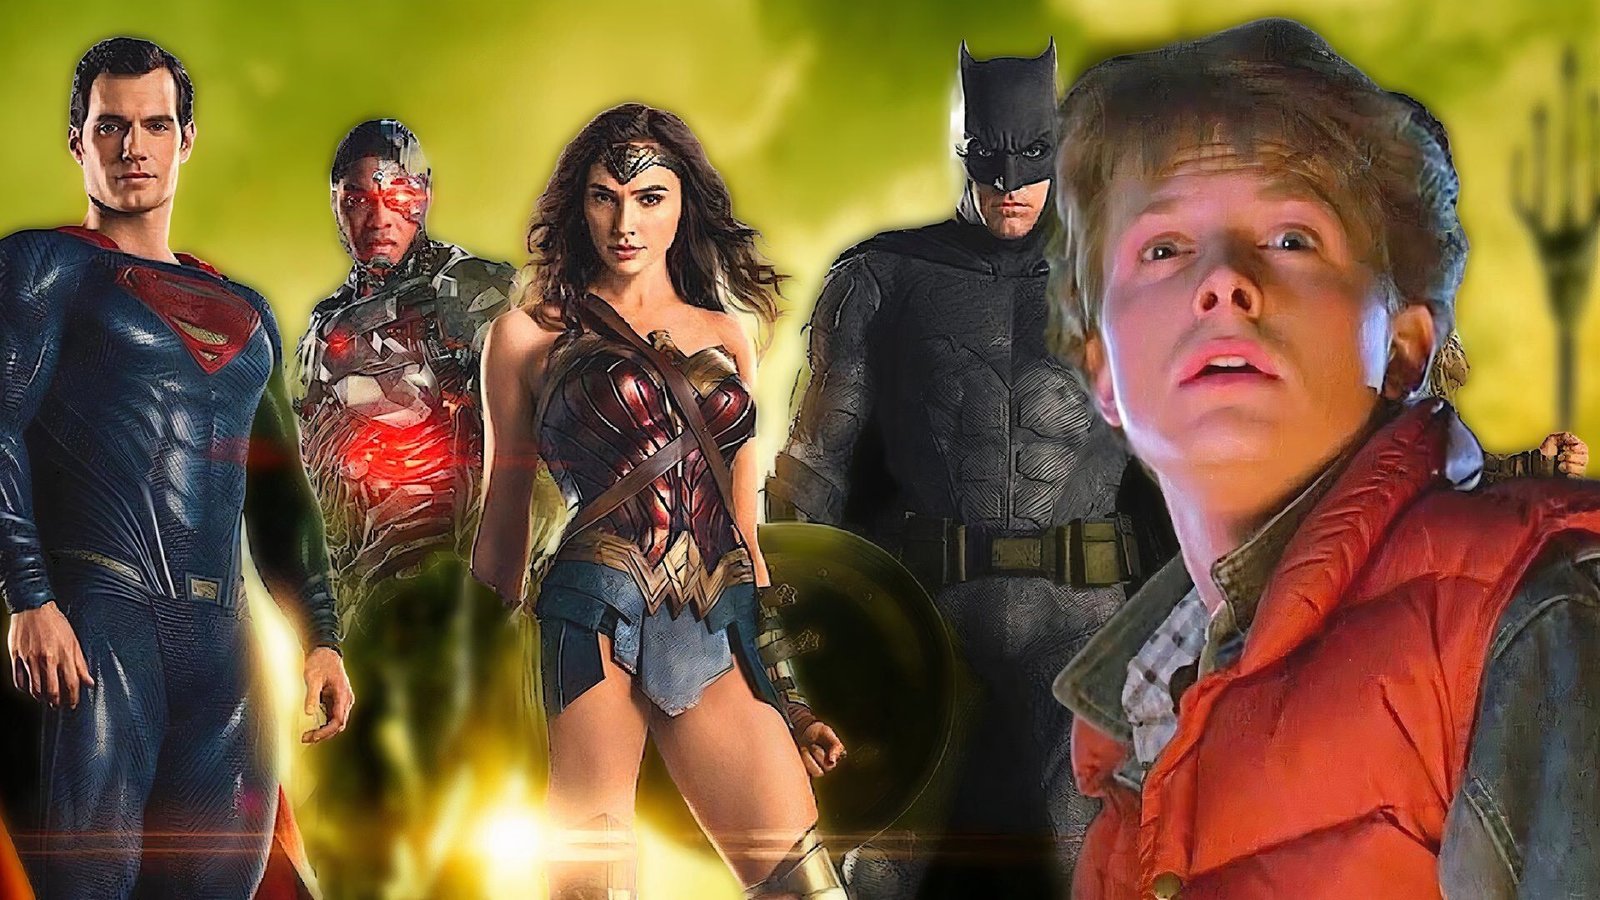 Justice League Screenwriter Compares Original Draft to Back to the Future Part II